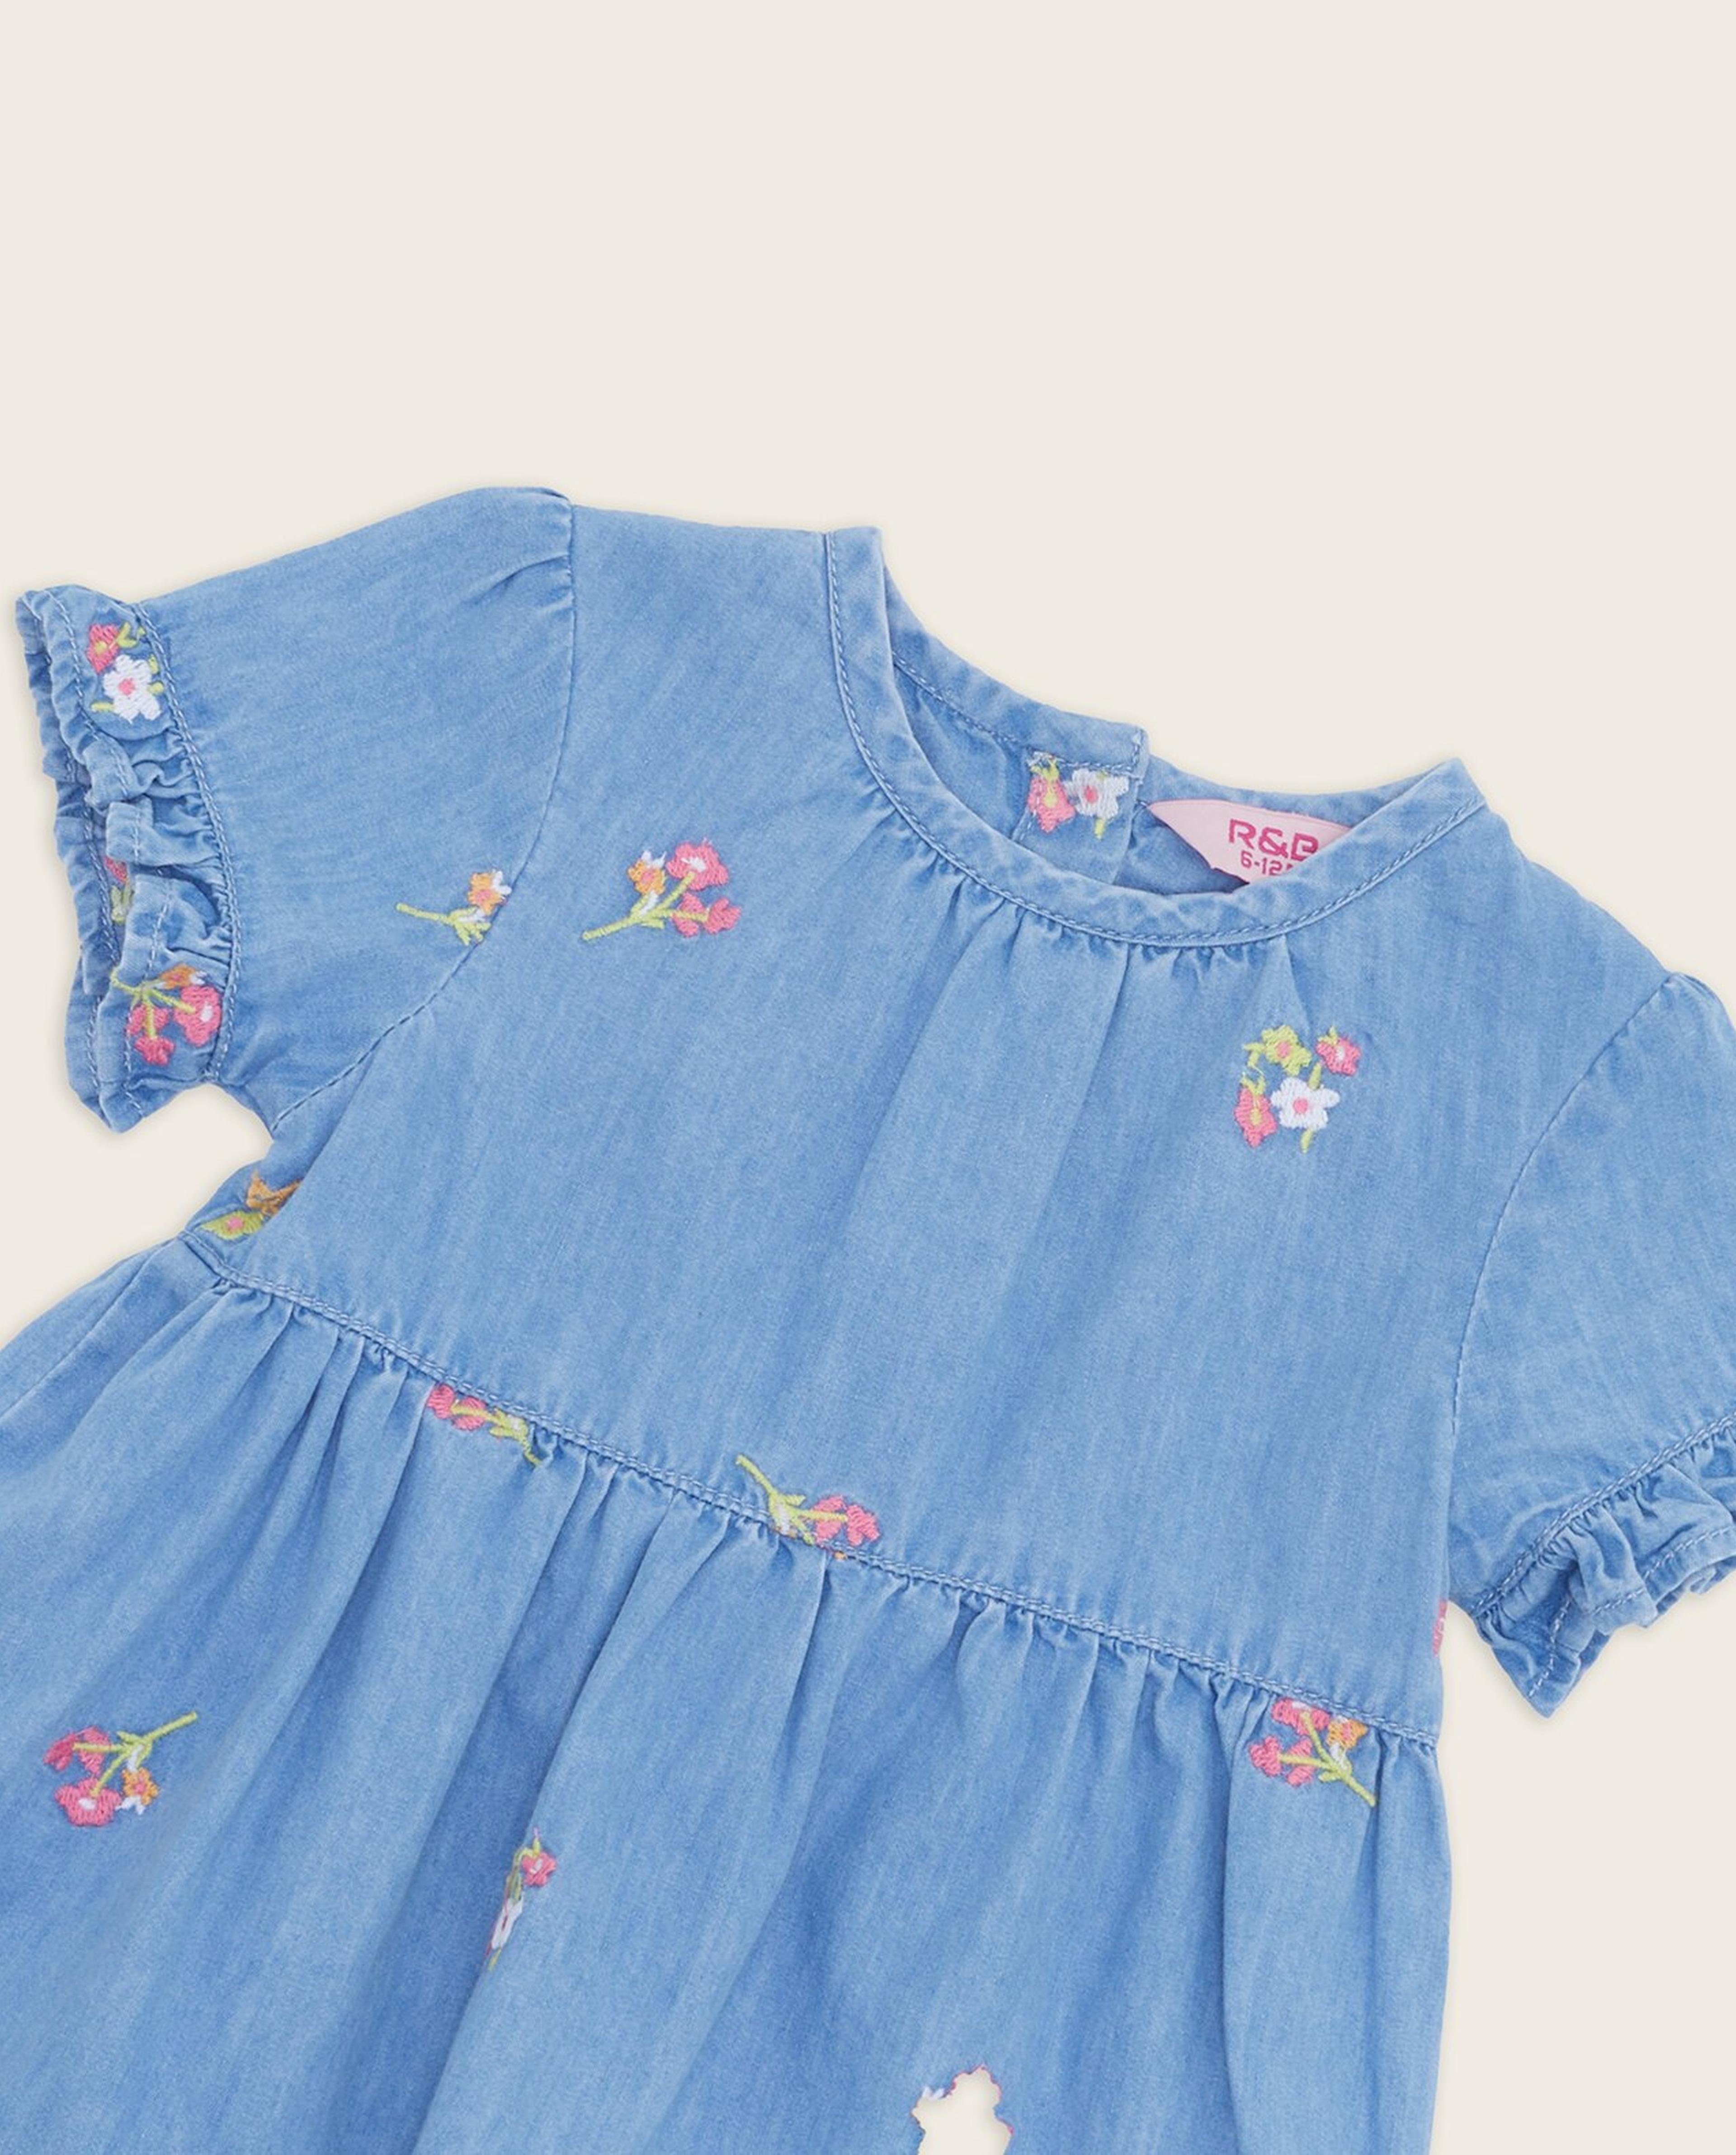 Embroidered Tiered Denim Dress with Short Sleeves